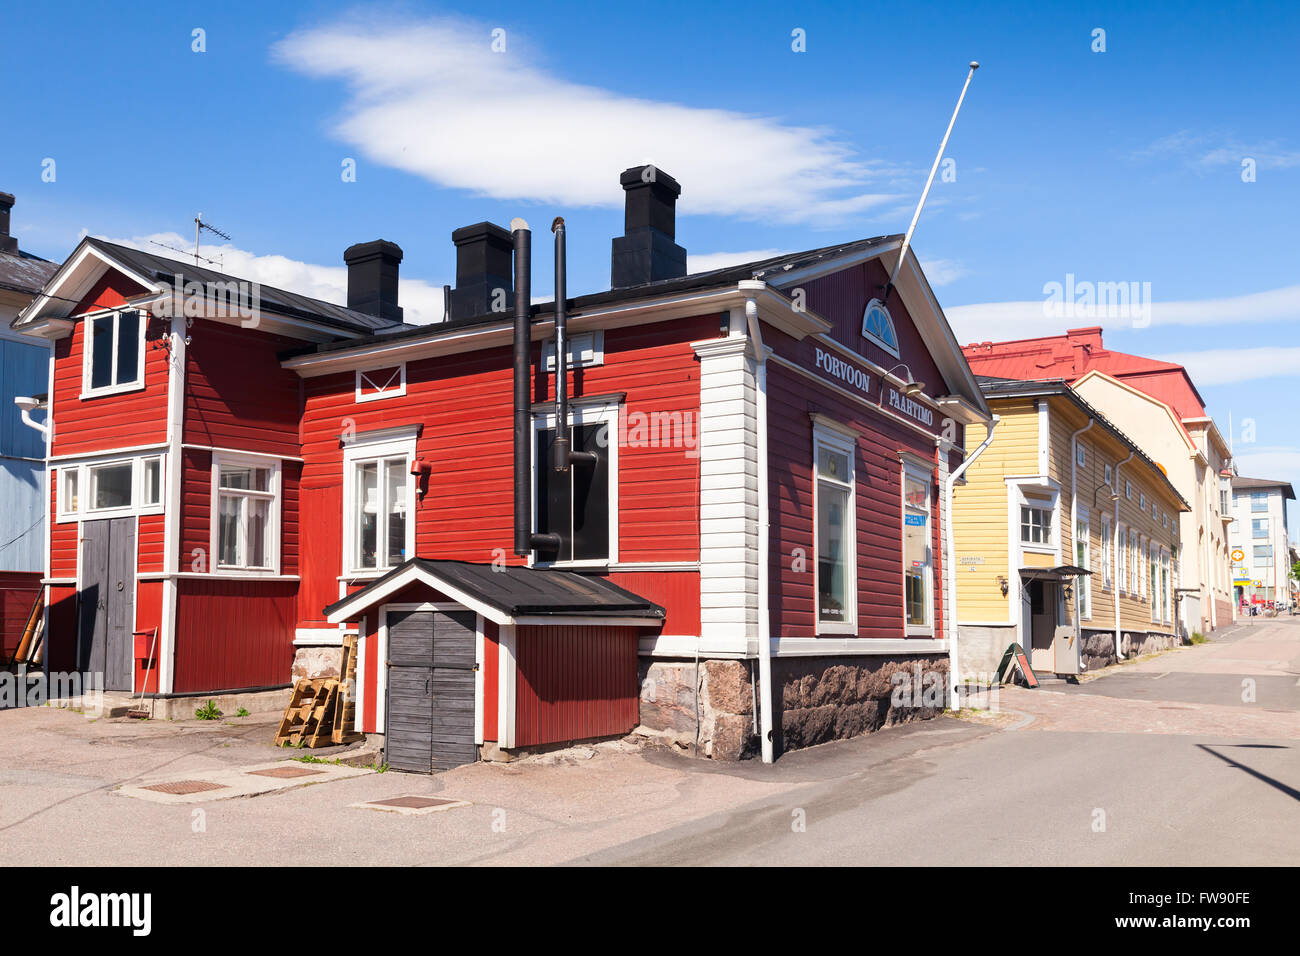 Porvoo, Finland - June 12, 2015: Street view with old red wooden house Porvoo Roastery in small historical Finnish town Stock Photo